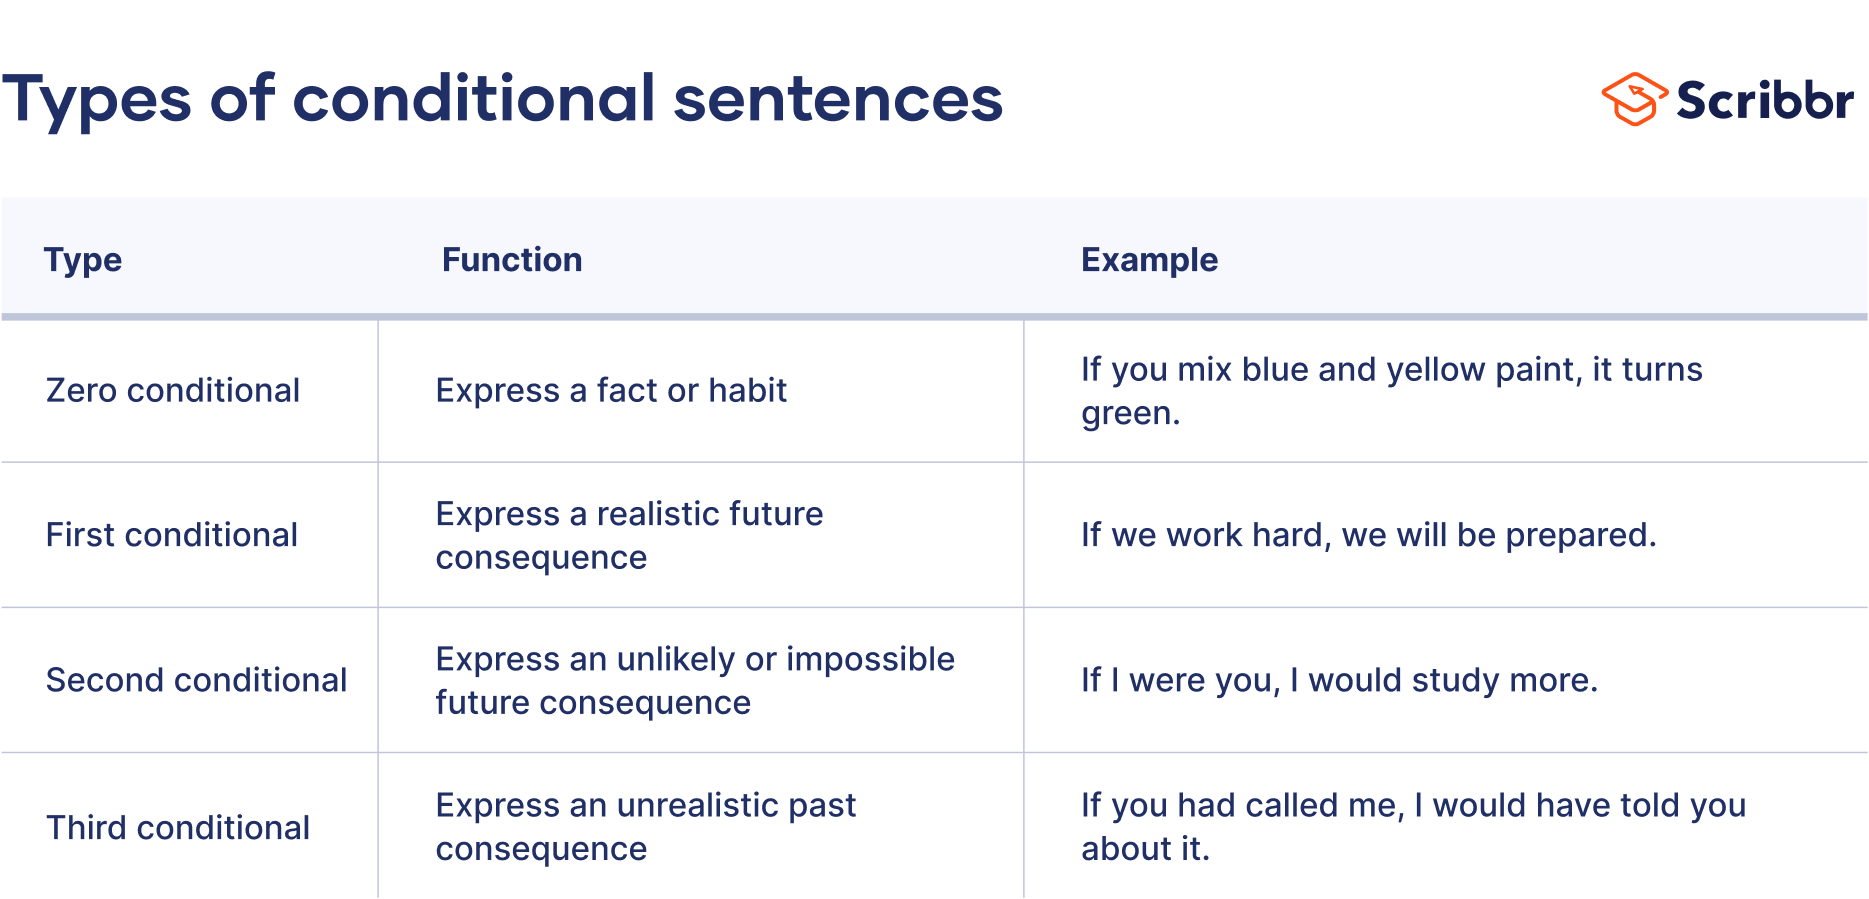 Parts of a Sentence in English